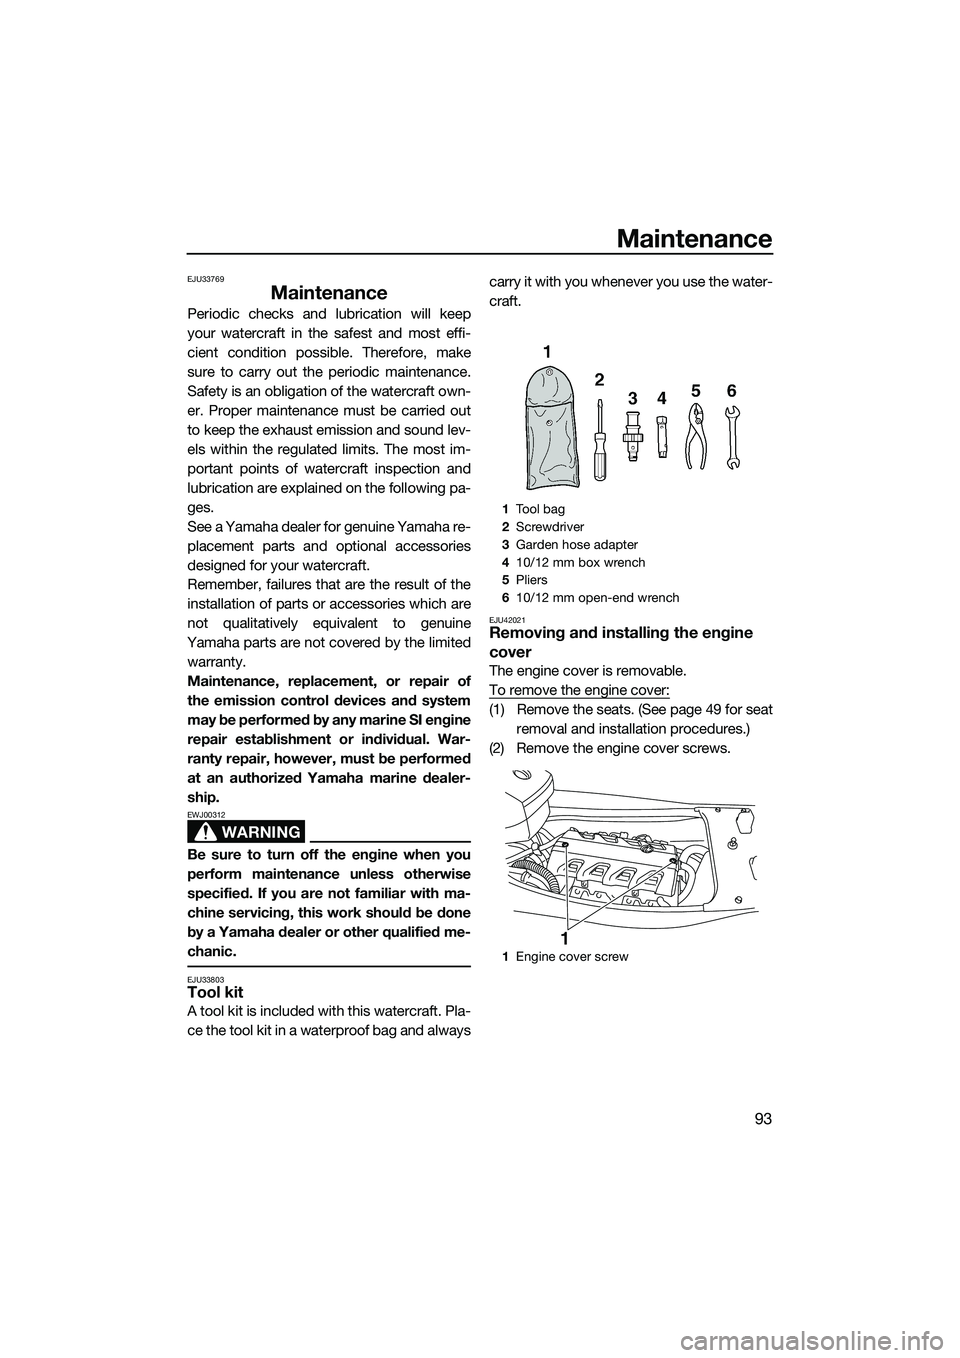 YAMAHA FX HO 2015  Owners Manual Maintenance
93
EJU33769
Maintenance
Periodic checks and lubrication will keep
your watercraft in the safest and most effi-
cient condition possible. Therefore, make
sure to carry out the periodic main